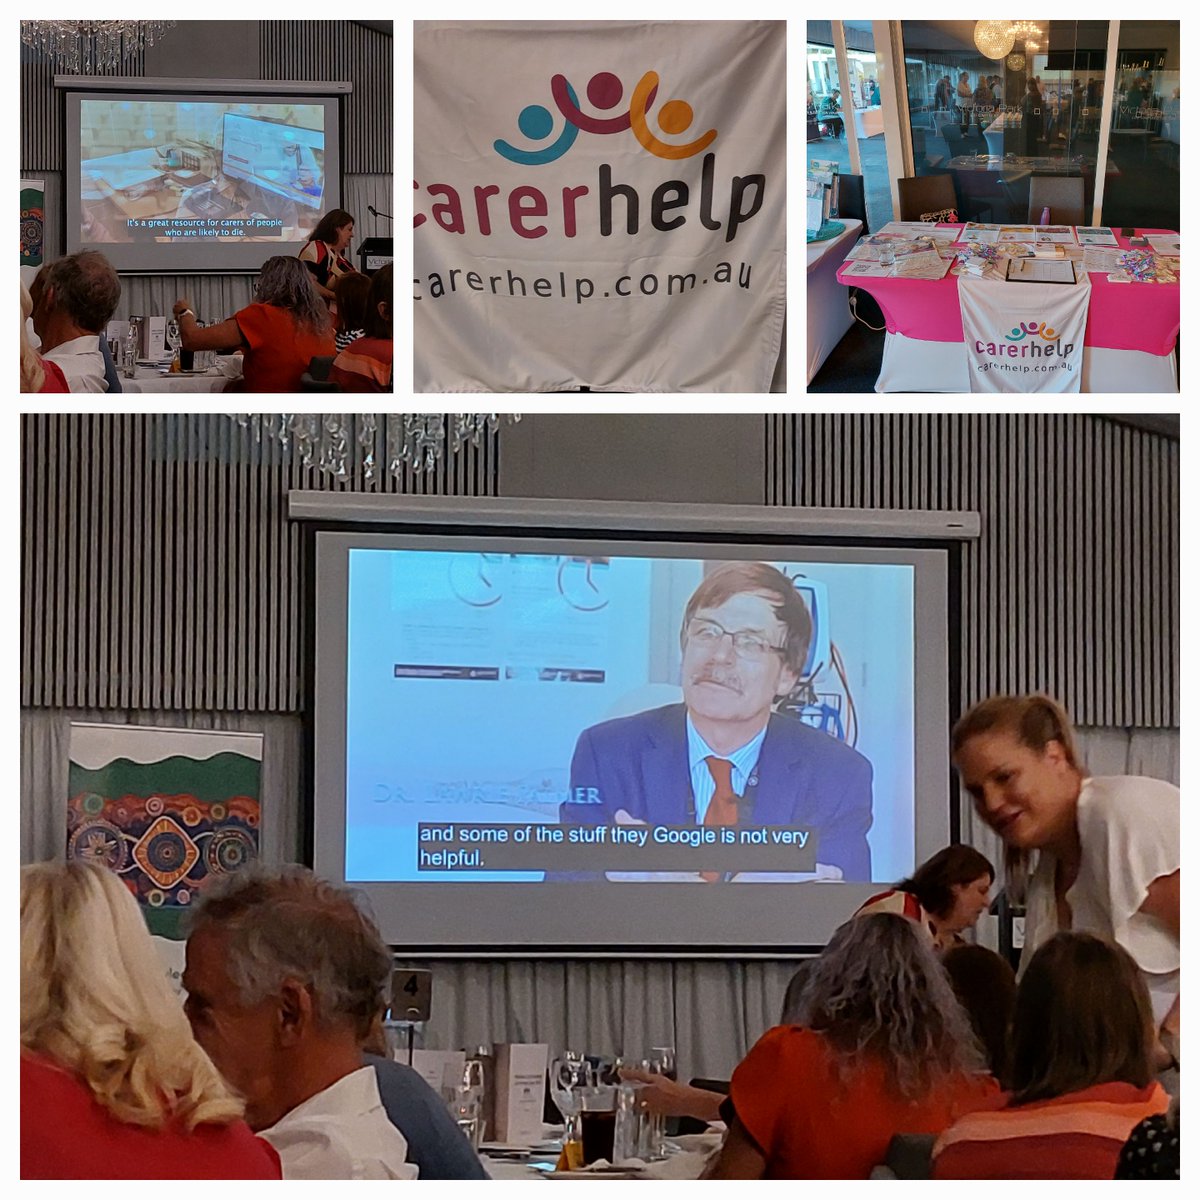 The #CarerHelp team were delighted to attend the @BrisNorthPHN #PalliativeCare evening for #primarycare last night and showcase what the CarerHelp website has to offer. Learn more about CarerHelp in this video ➡️ carerhelp.com.au/News/CarerHelp…